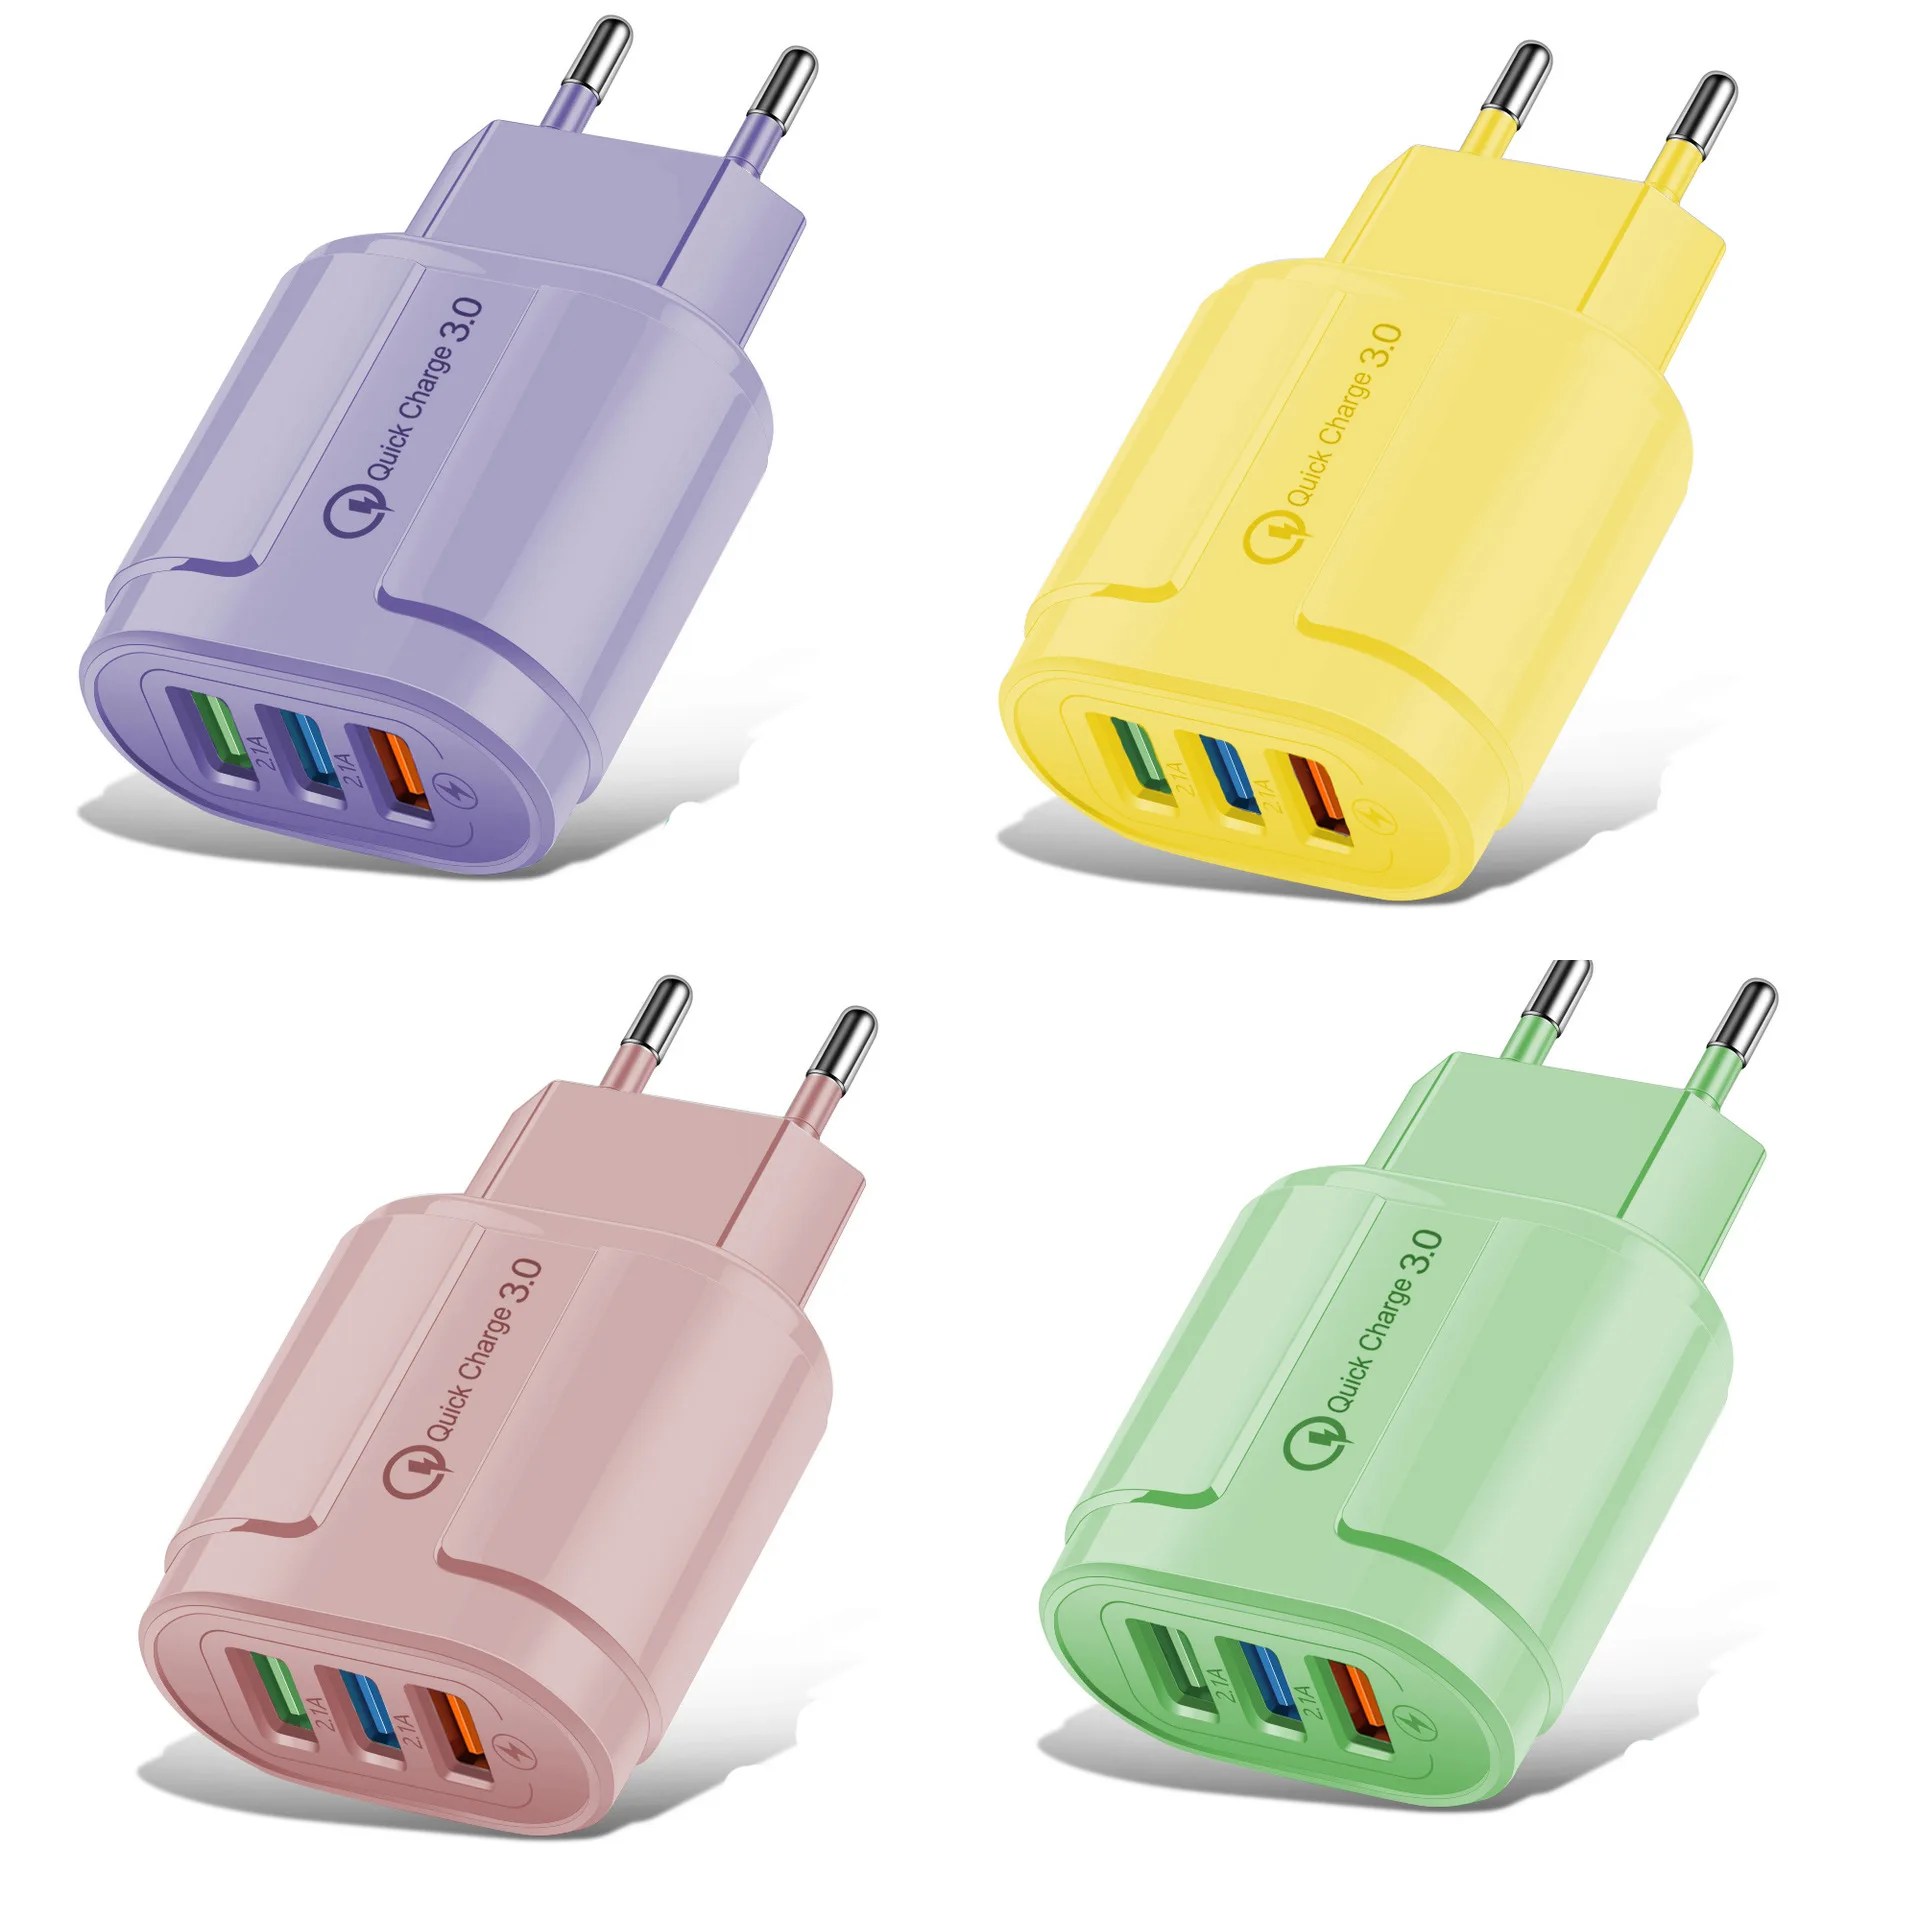 

USB Charger Quick charge 5V 2A 3 Ports Mobile Phone Chargers Fast Charging Tablet Wall Adapter AC/DC Adapters